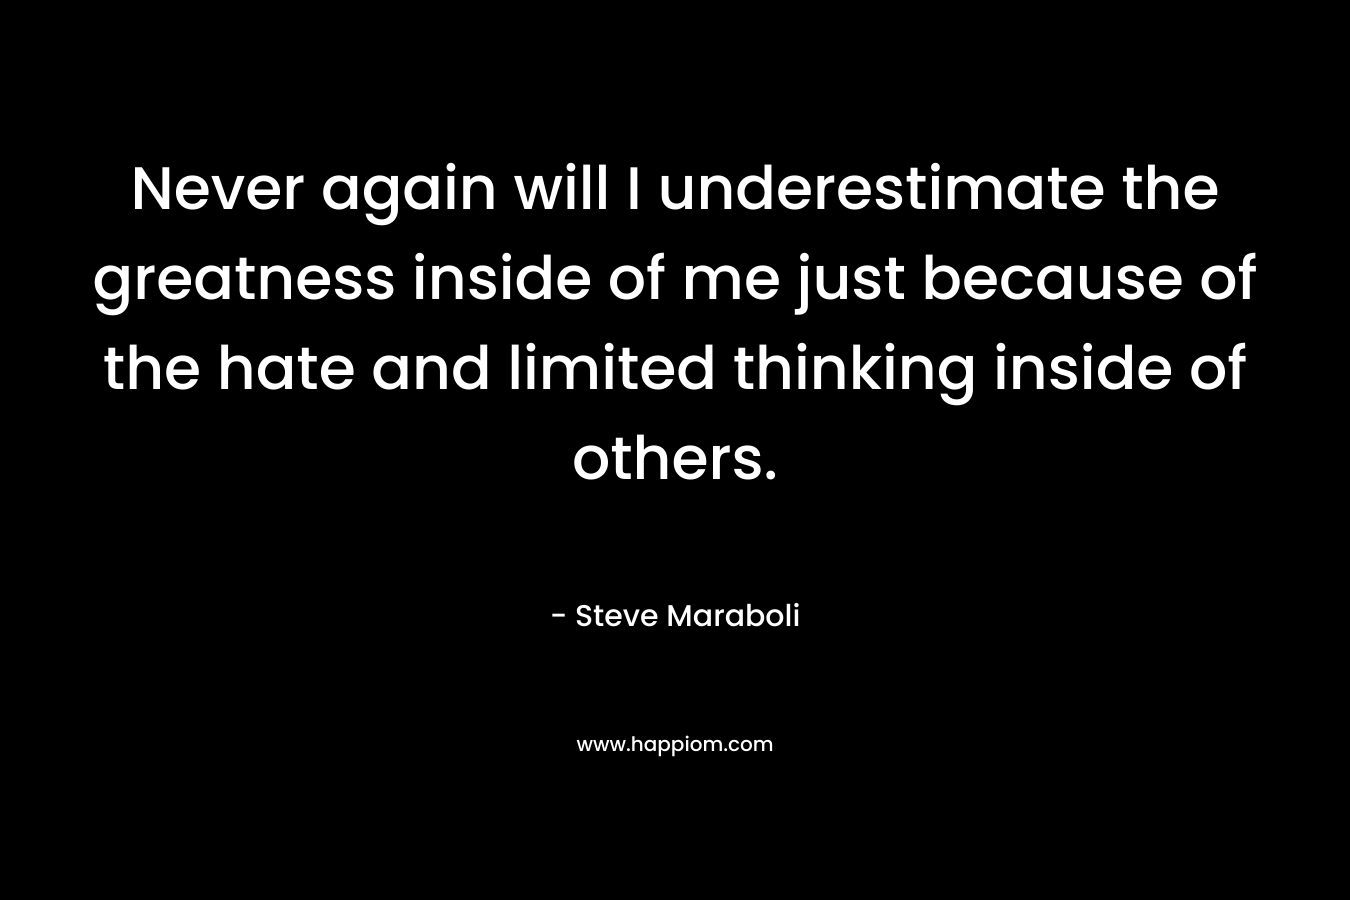 Never again will I underestimate the greatness inside of me just because of the hate and limited thinking inside of others.